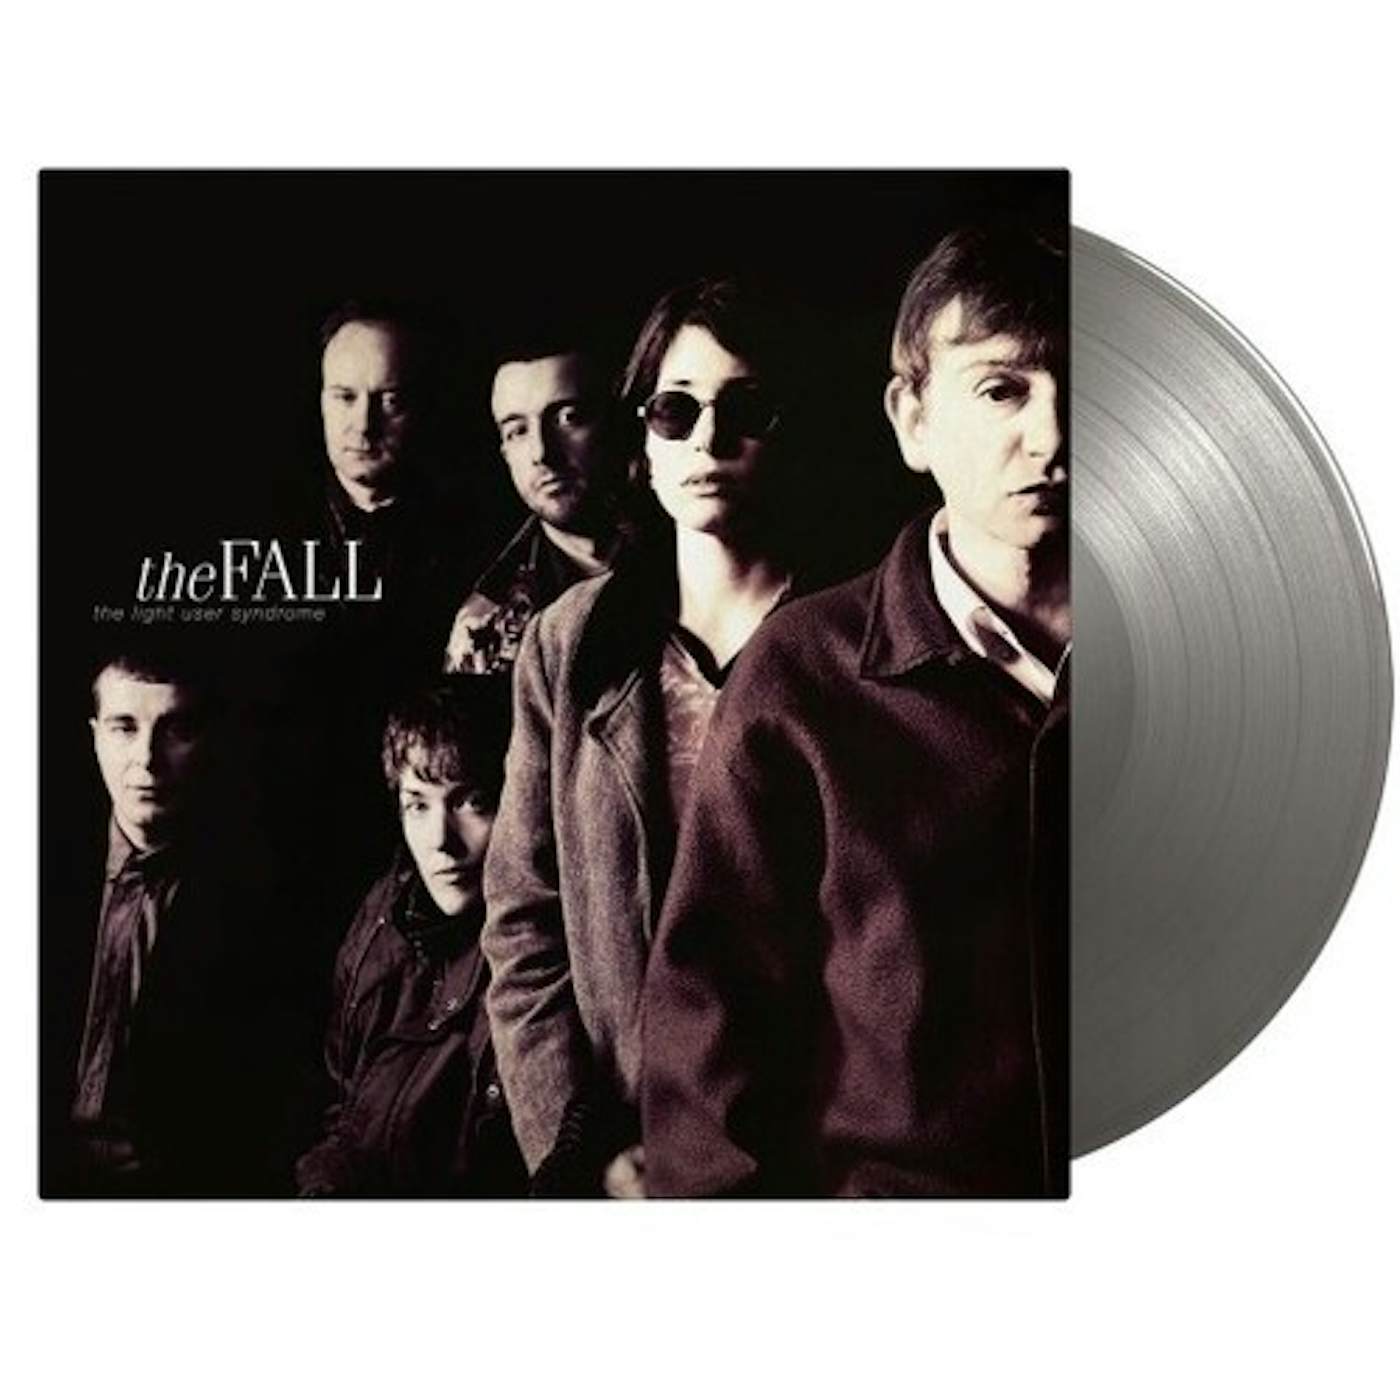 The Fall LIGHT USER SYNDROME Vinyl Record